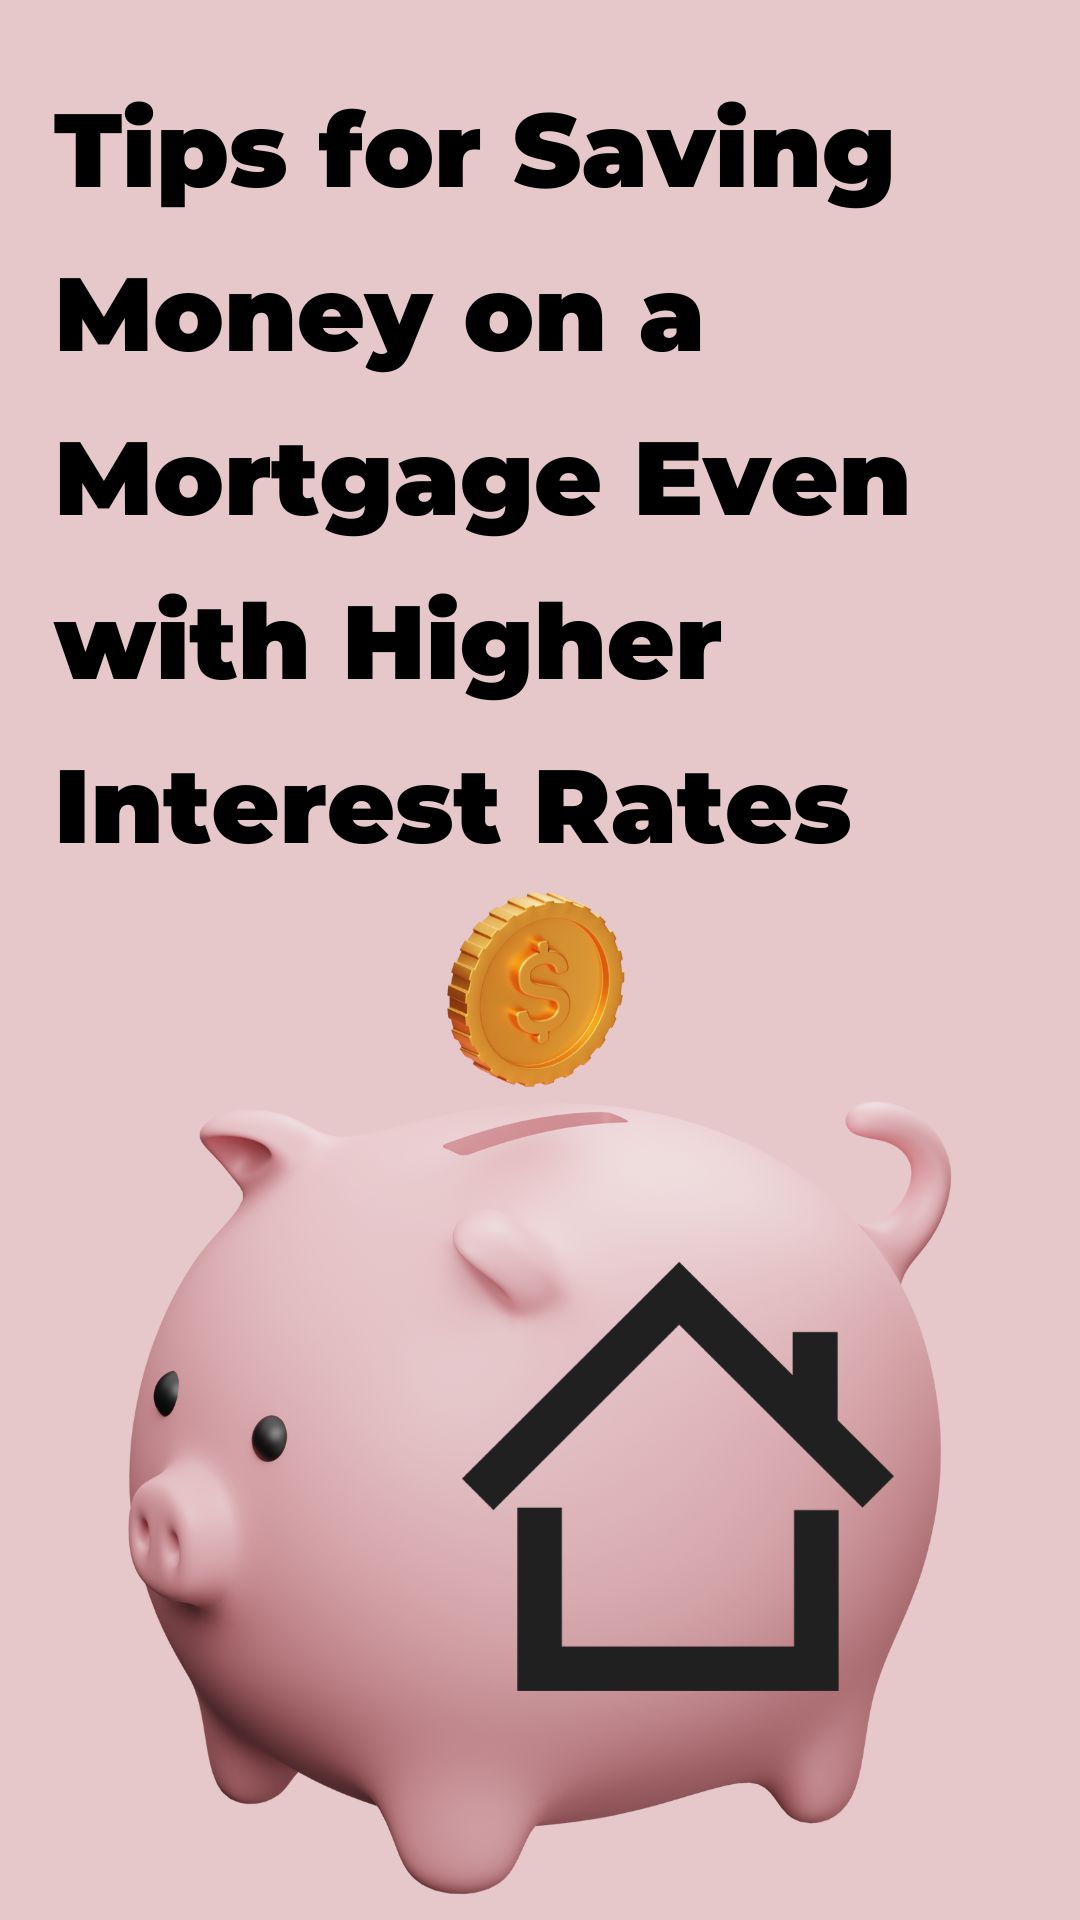 Tips for Saving Money on a Mortgage Even with Higher Interest Rates